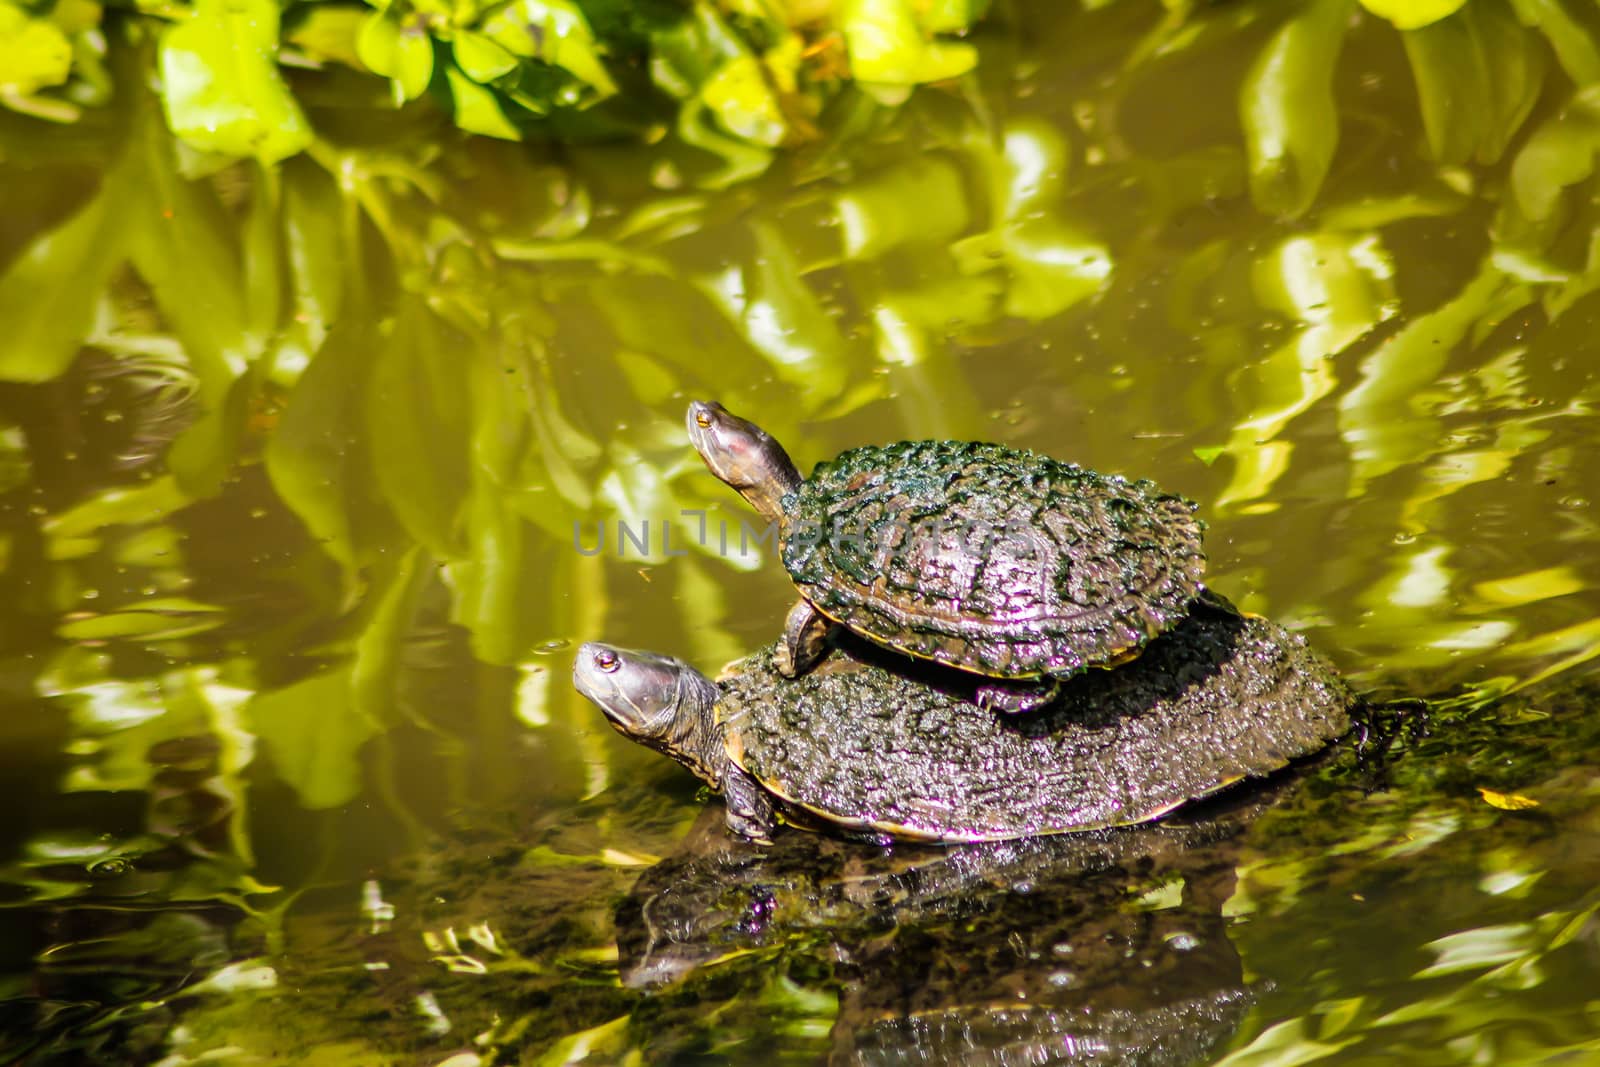 Aquatic turtle in a pond 3 by pippocarlot